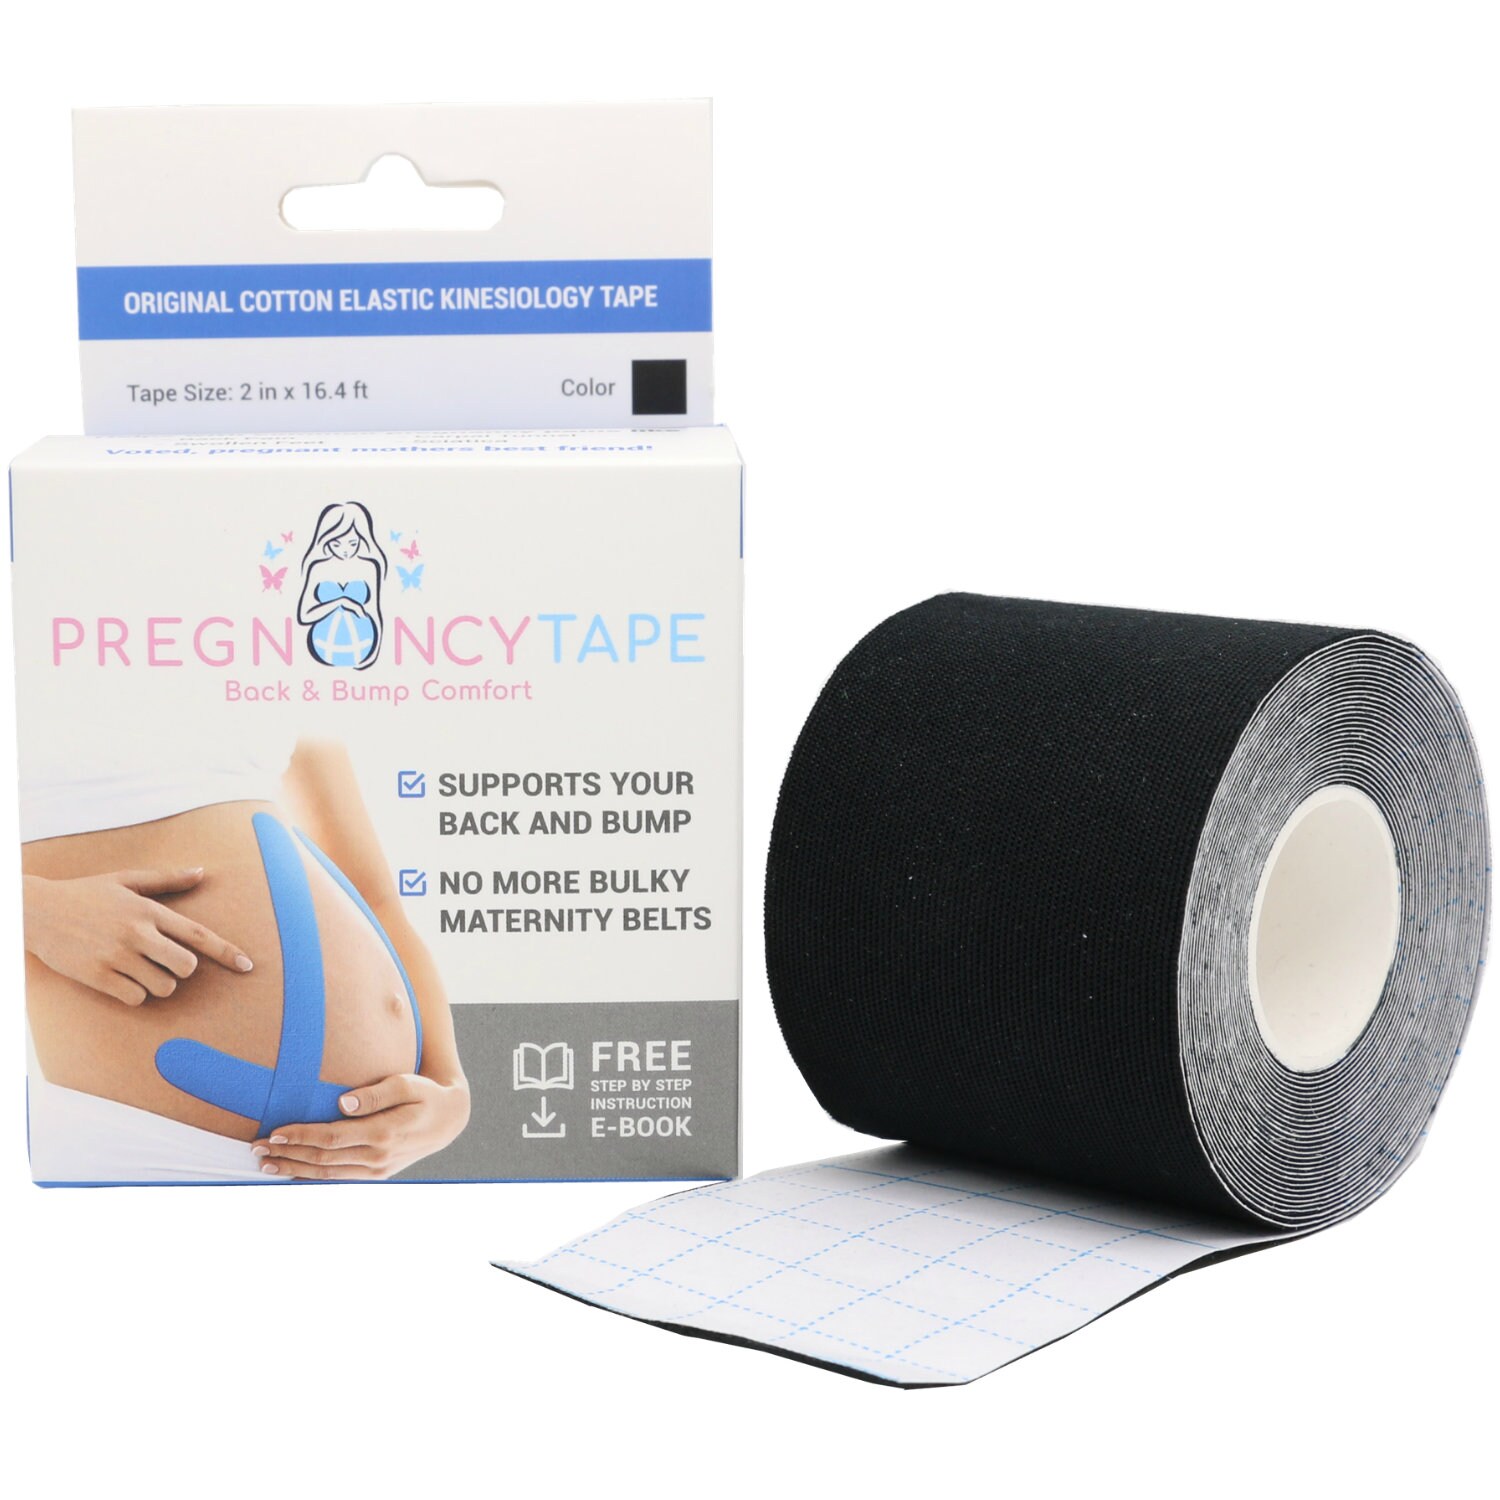 Back & Bump Comfort Pregnancy Tape - Maternity Belly Support Tape | #1  Pregnancy Gifts For Women, Pregnancy Belt - Gift for Expecting Mom (Blue)